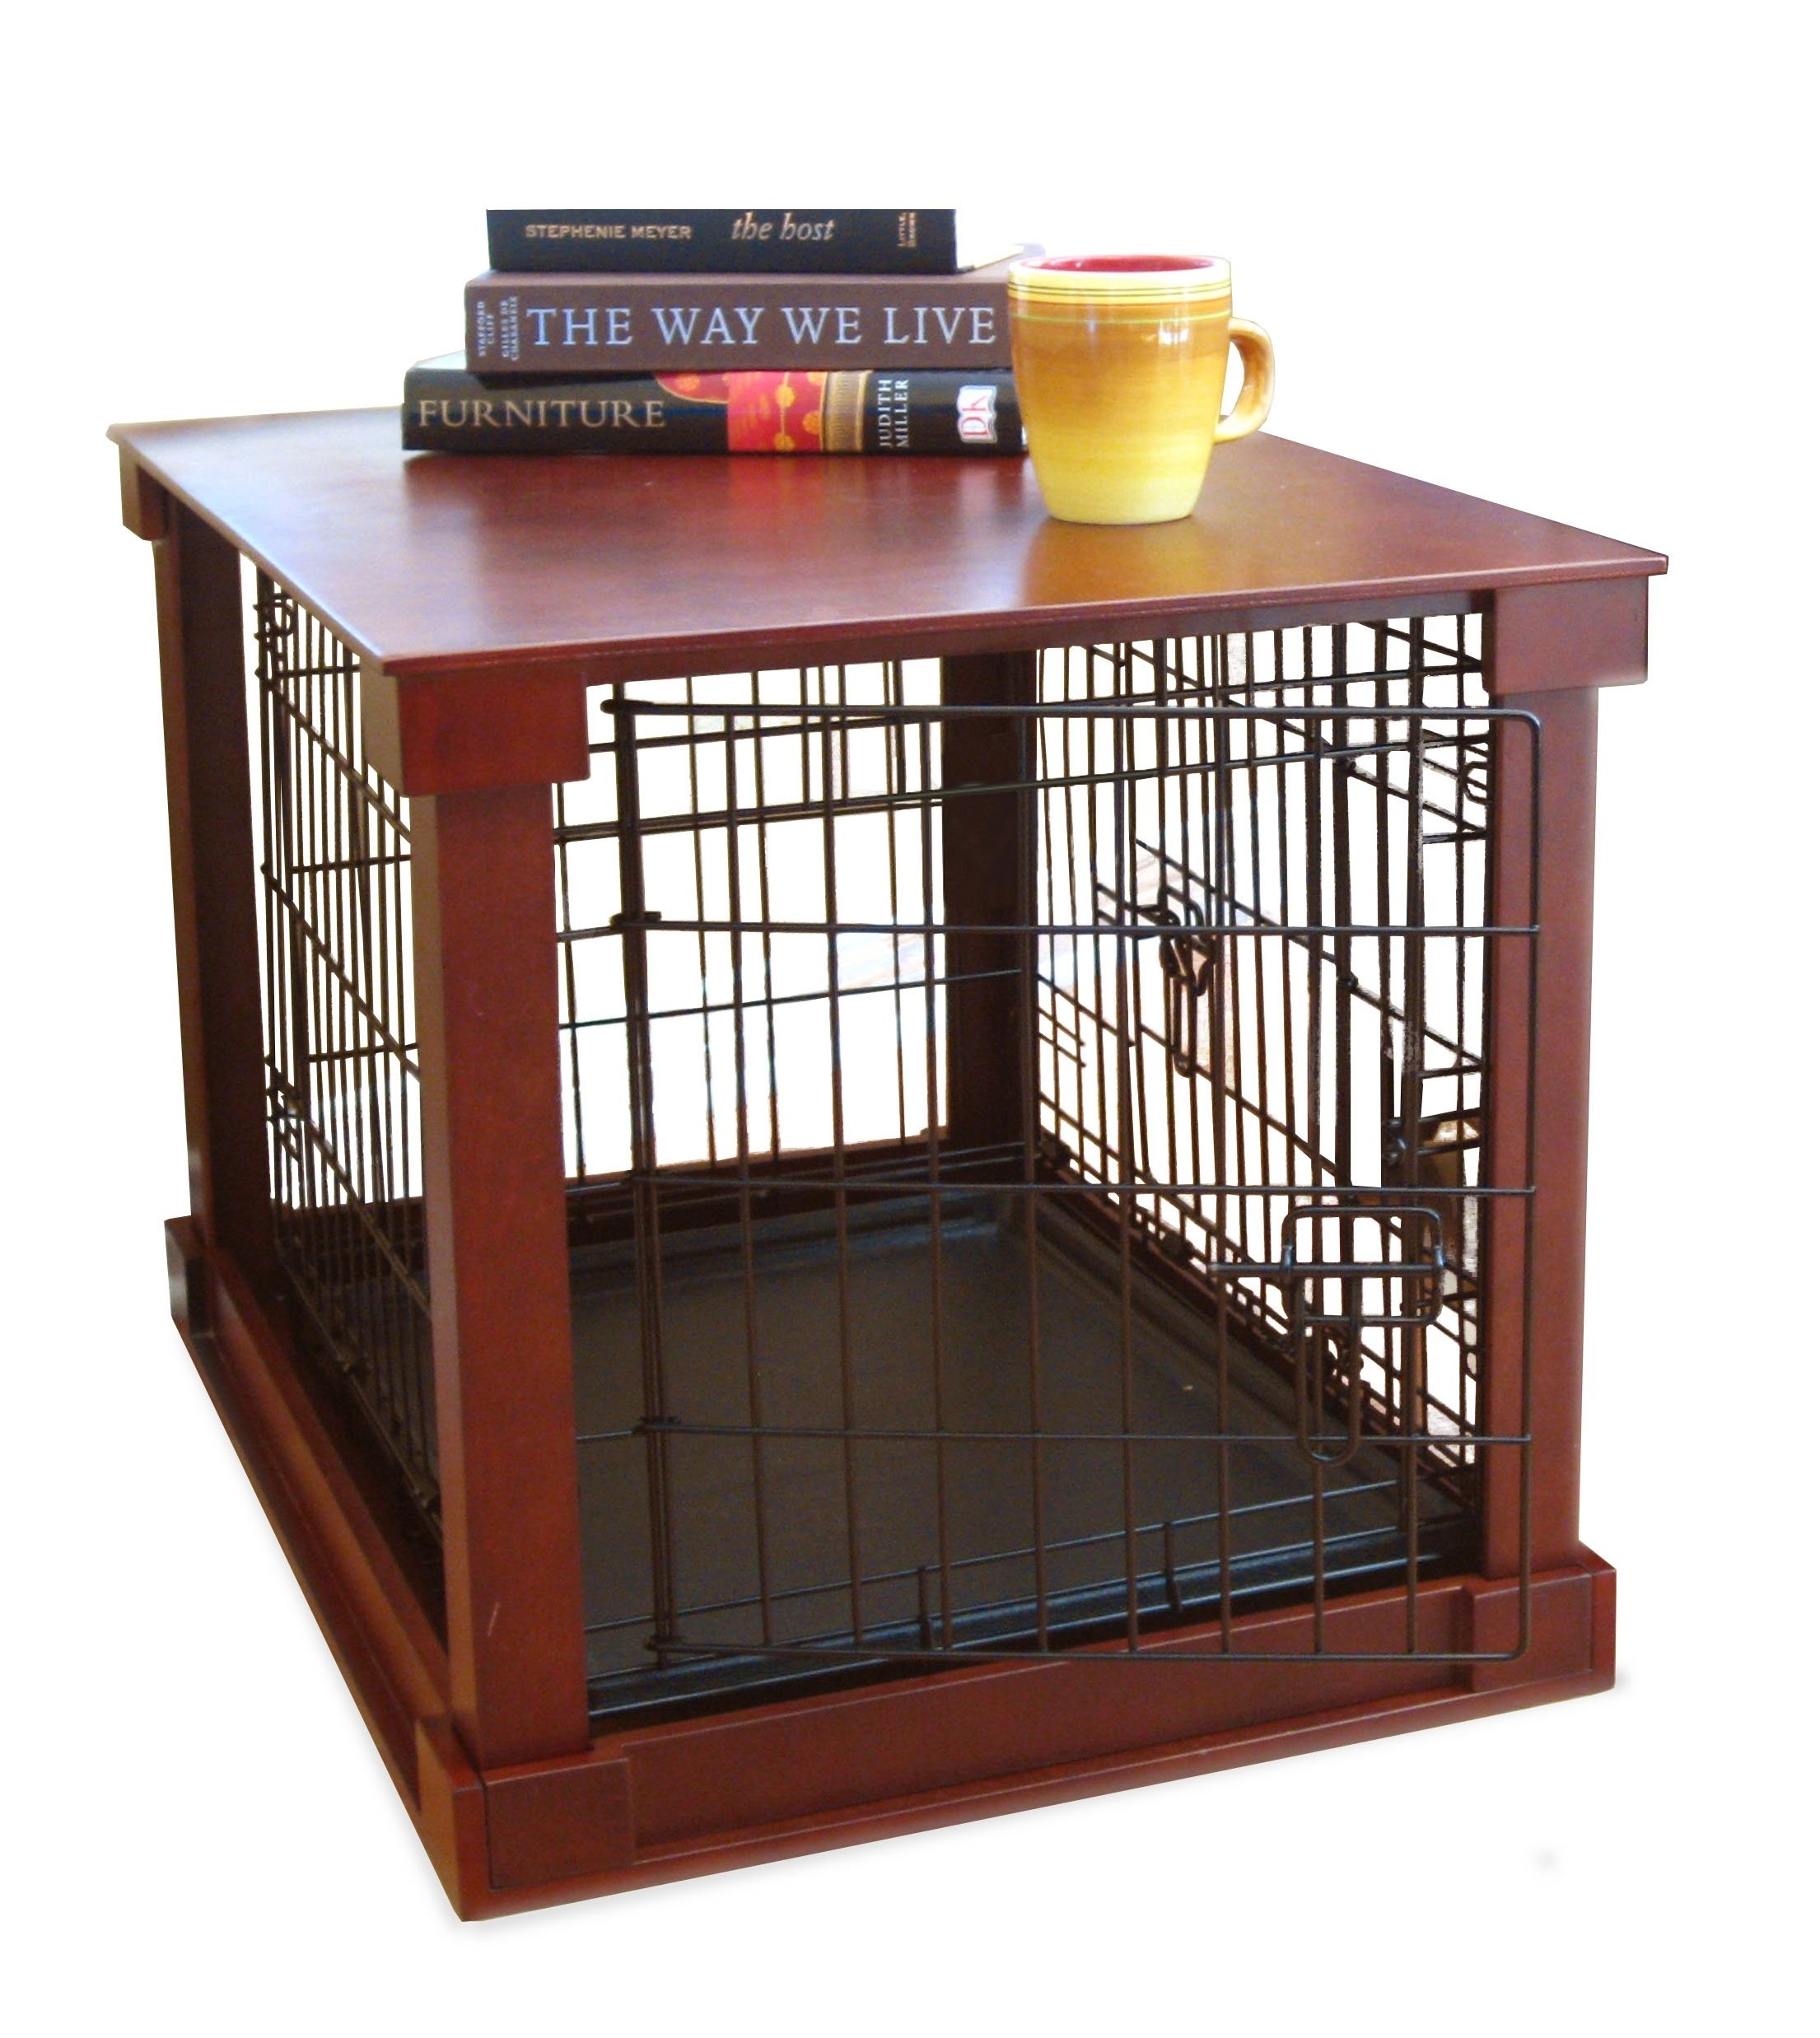 Merry products dog crate with wooden cover